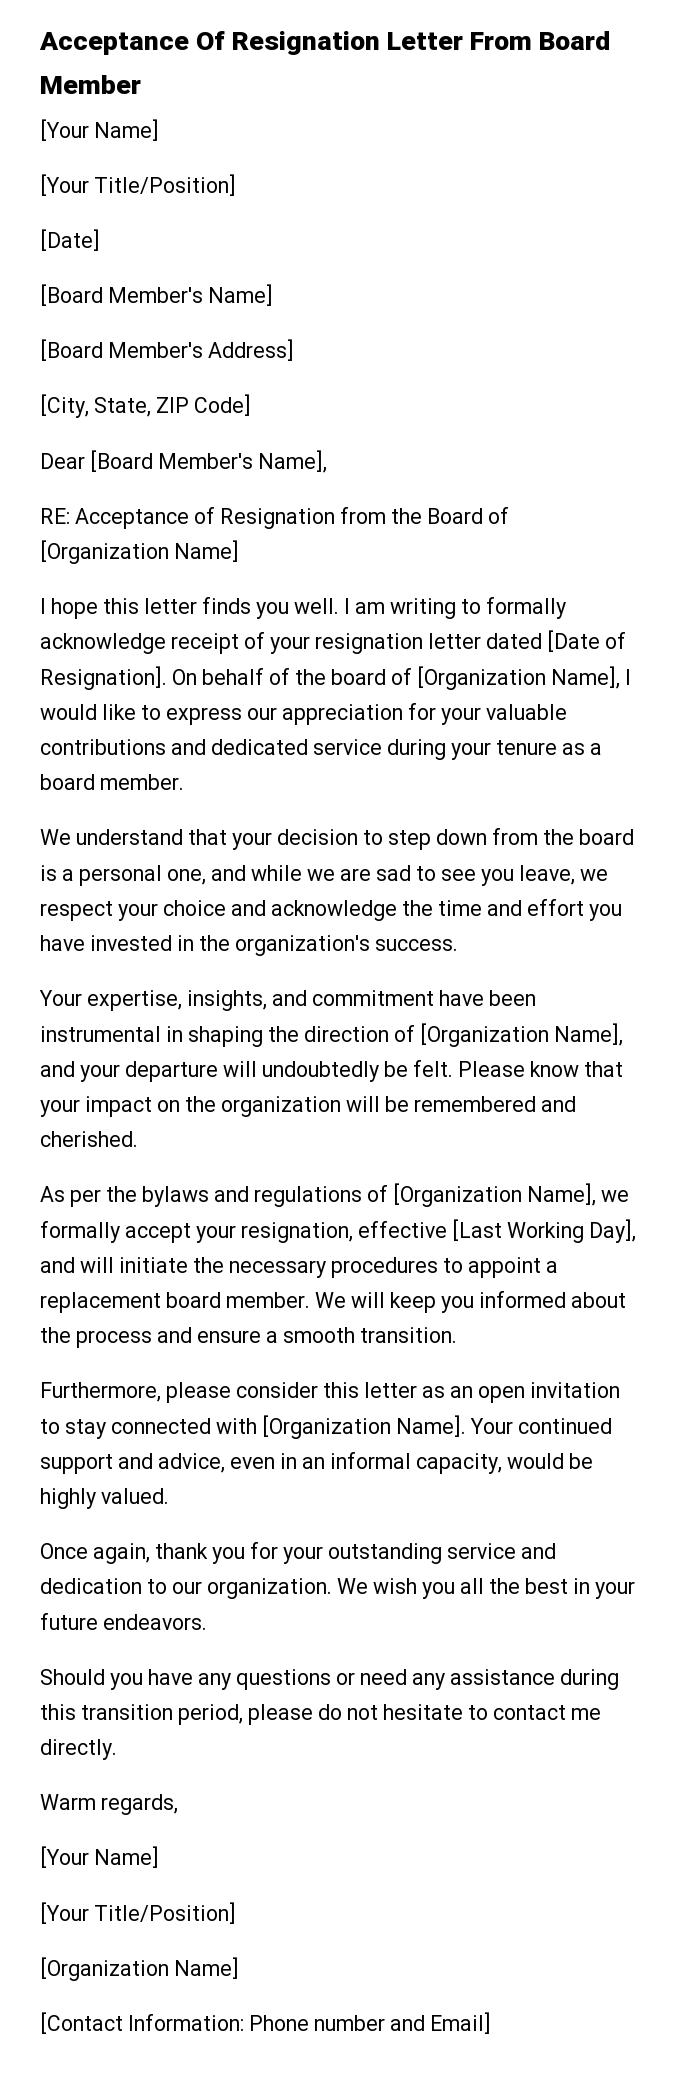 Acceptance Of Resignation Letter From Board Member